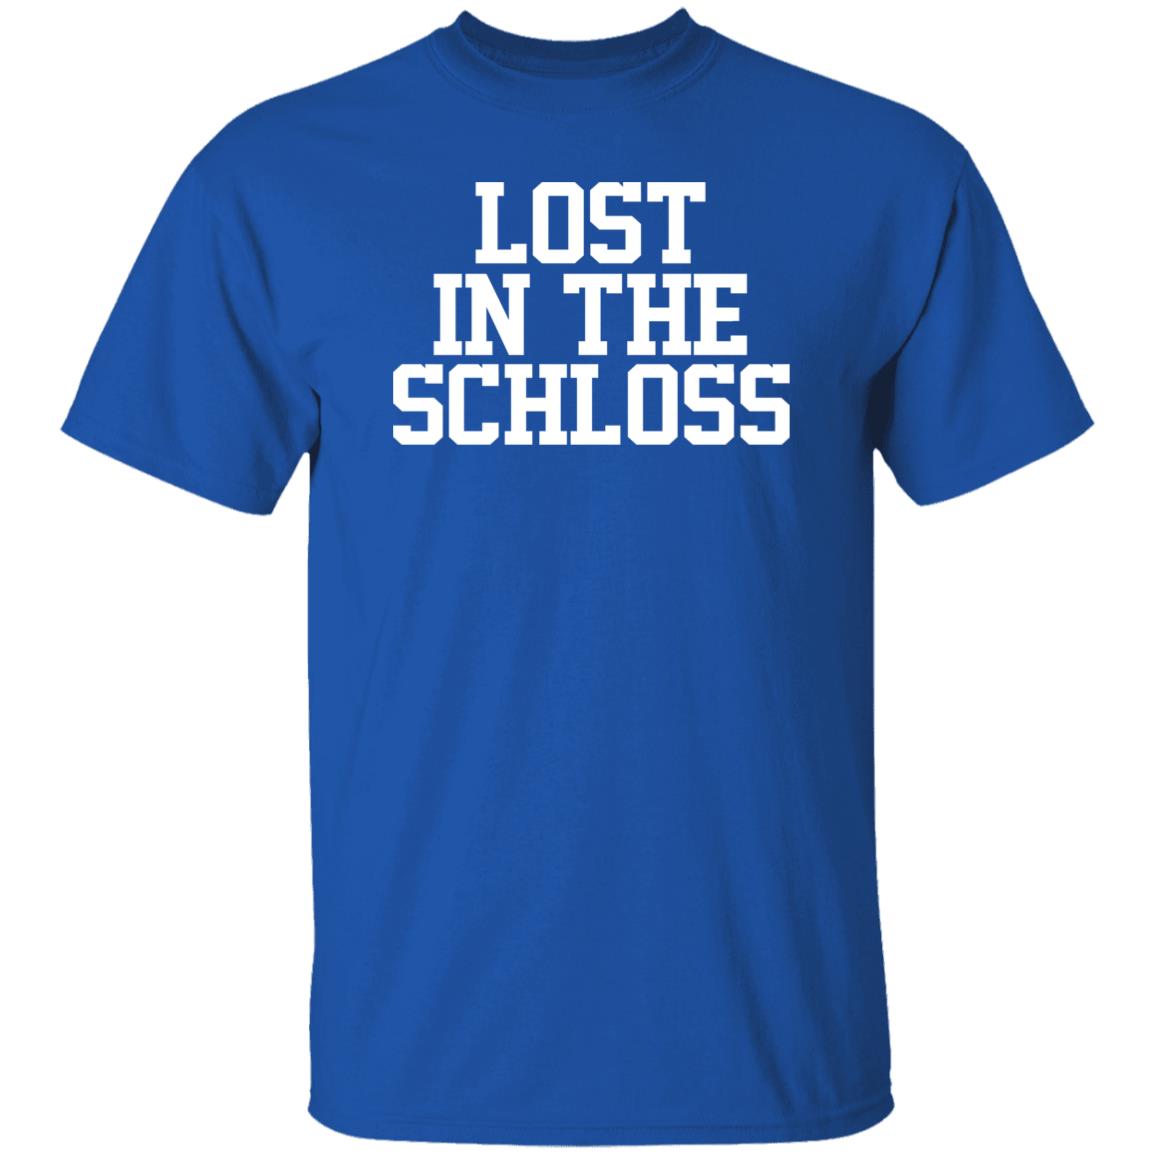 #5 Lost In The Schloss Barstool Texas A&M Lost In The Schloss Shirt Barstool Sports Store